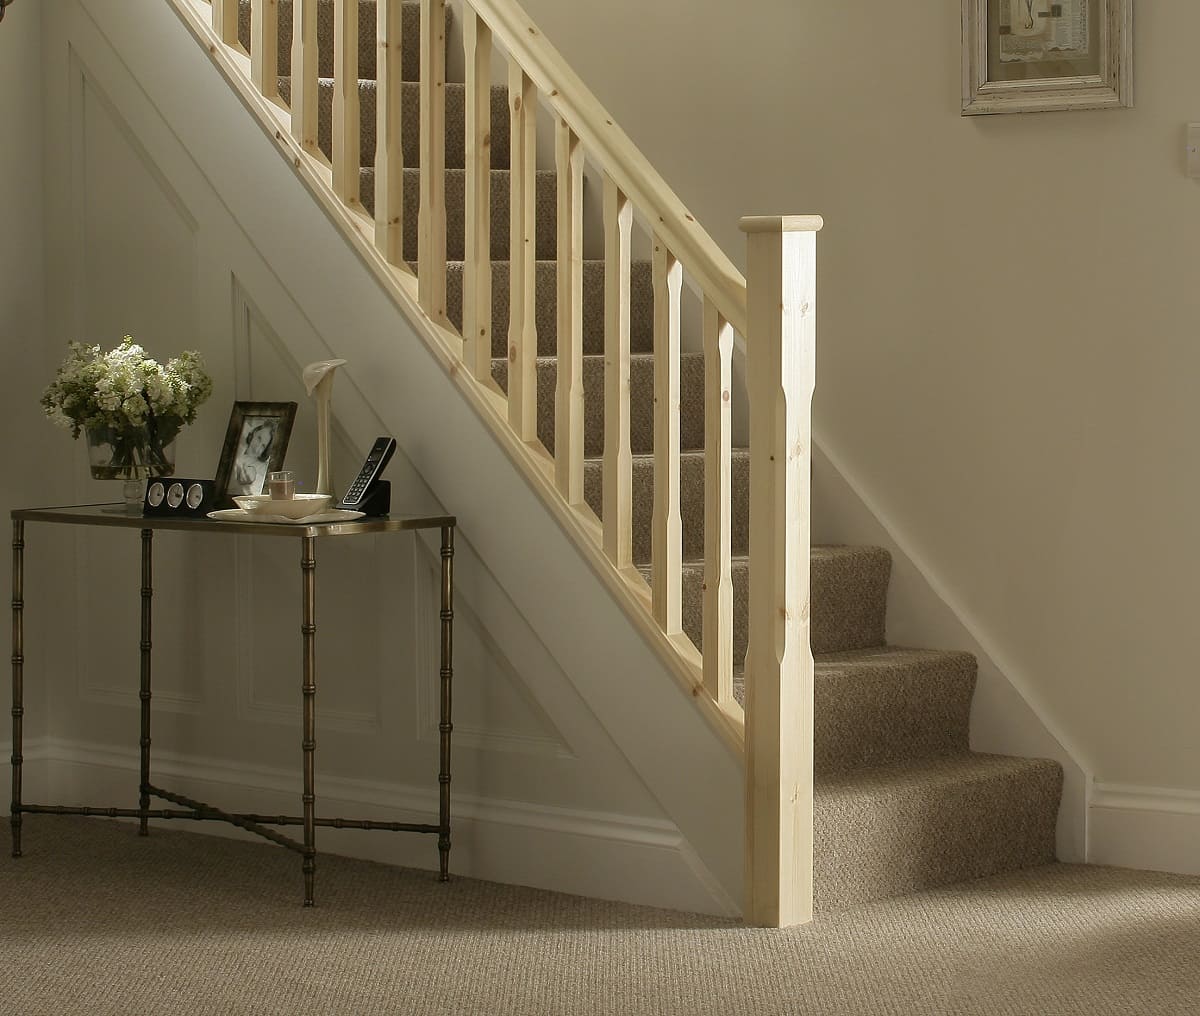 How To Install Newel Post On Stairs